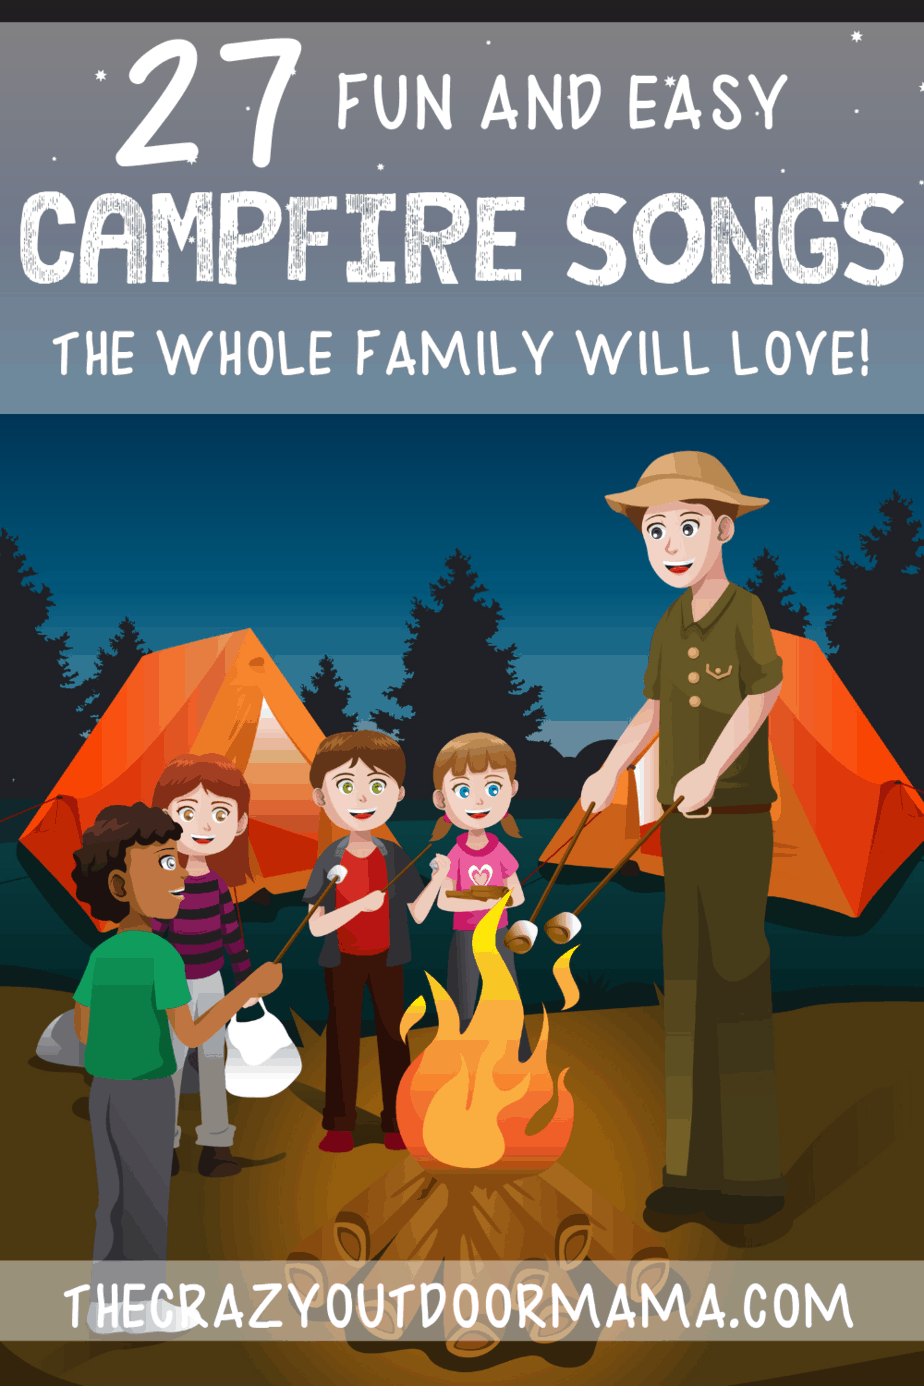 53-favorite-family-campfire-songs-pdf-printables-the-crazy-outdoor